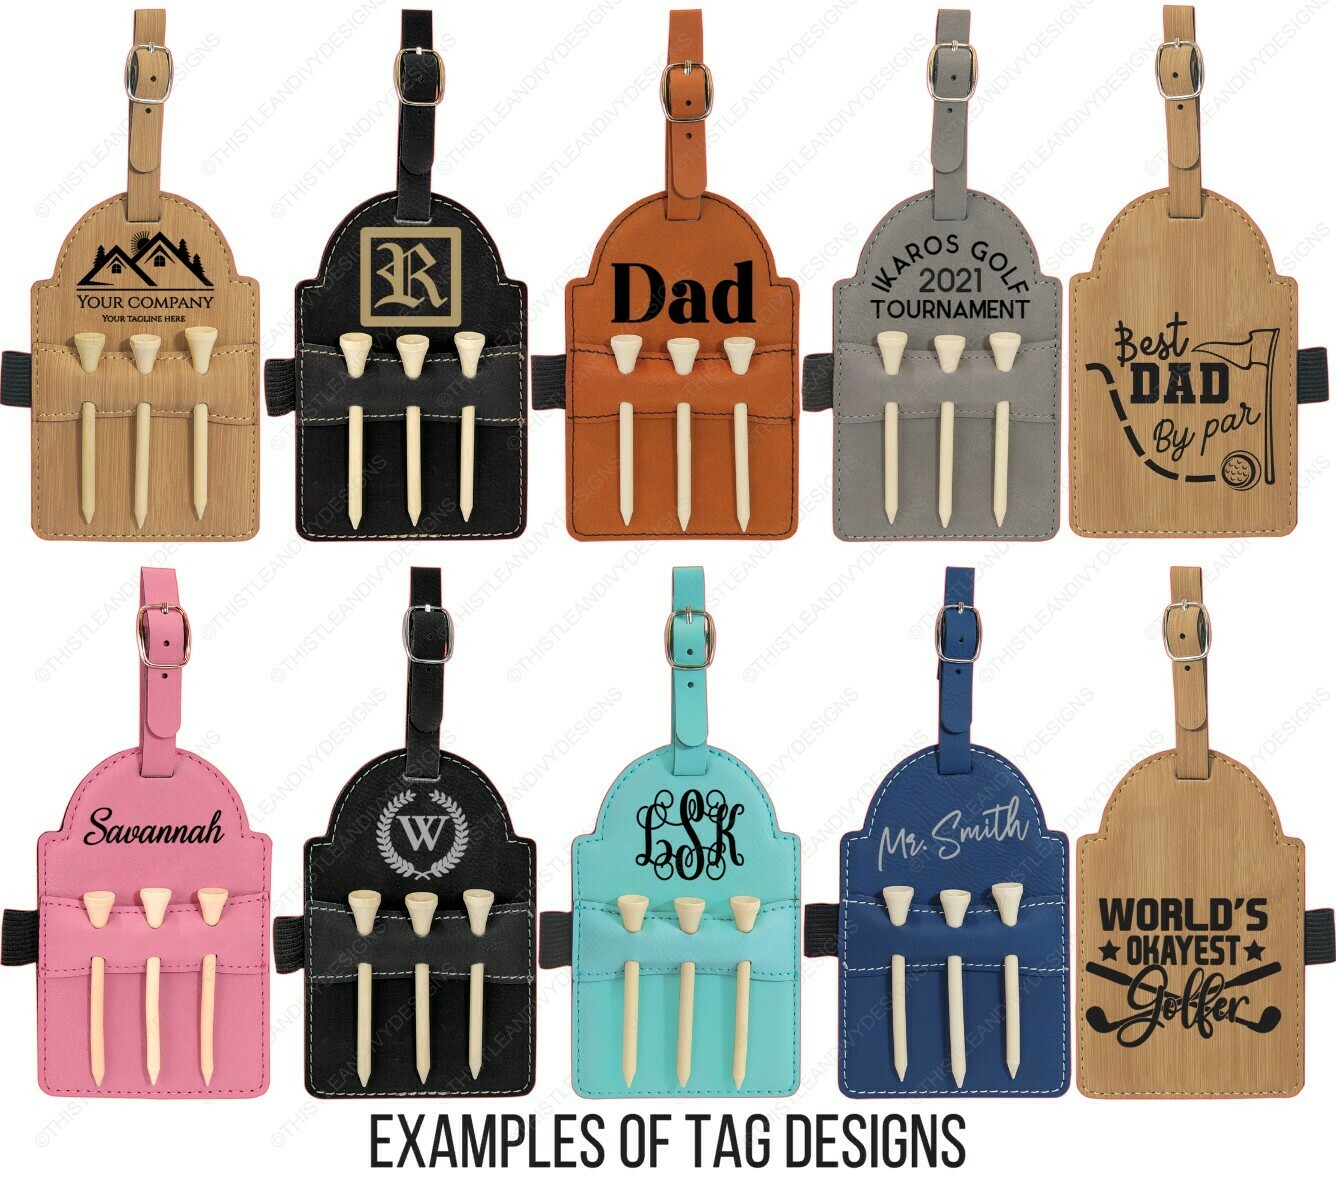 Personalized Golf Bag Tag and Tee Set